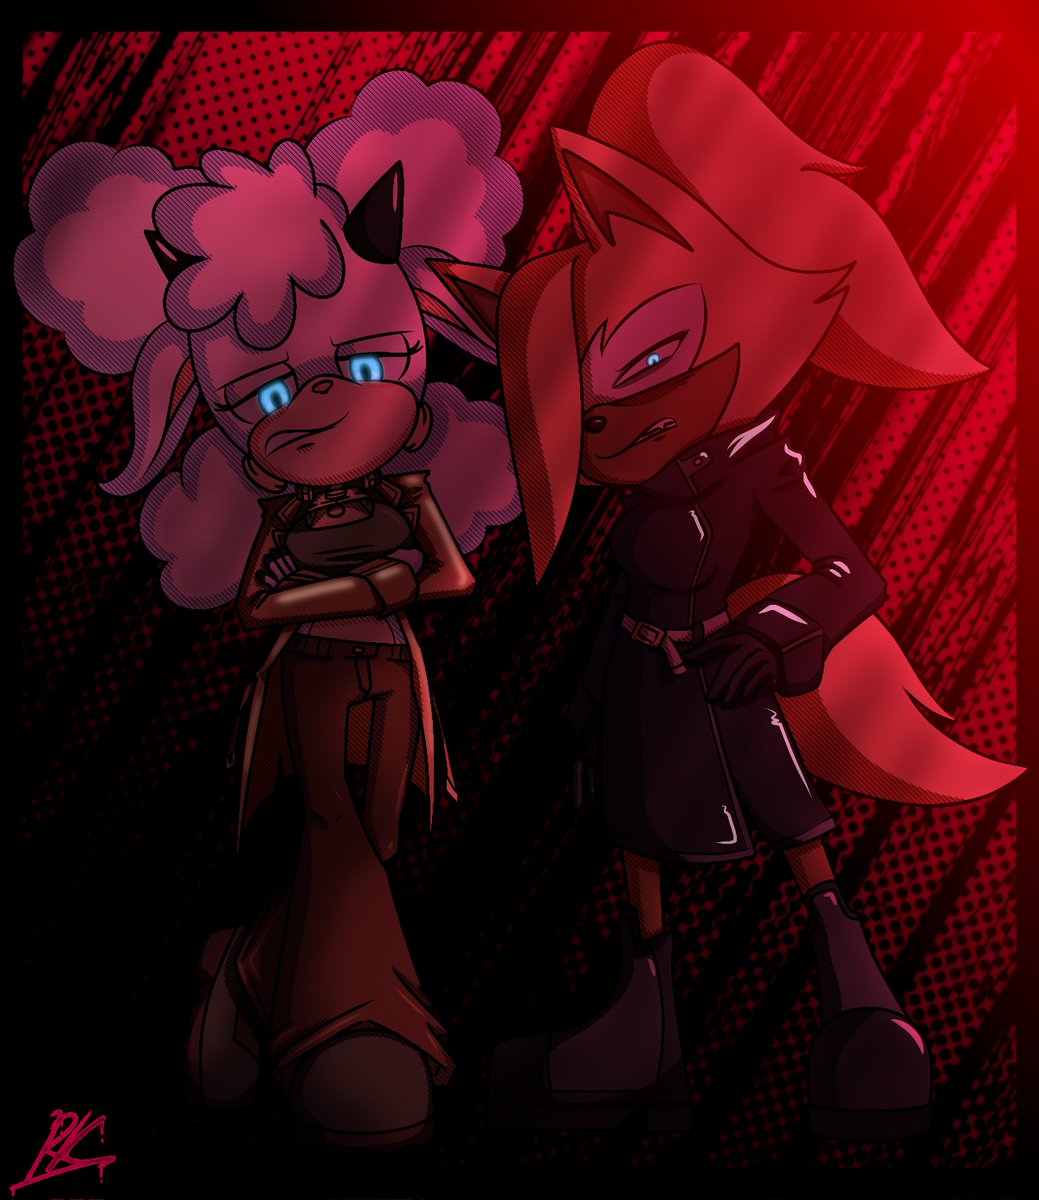 I've already drawn a lot of Tangle, let's give some love to the rest of her team.

#whisperthewolf
#lanolinthesheep
#sonicfanart
#MuyEdgyComoDicenLosSonicCabros